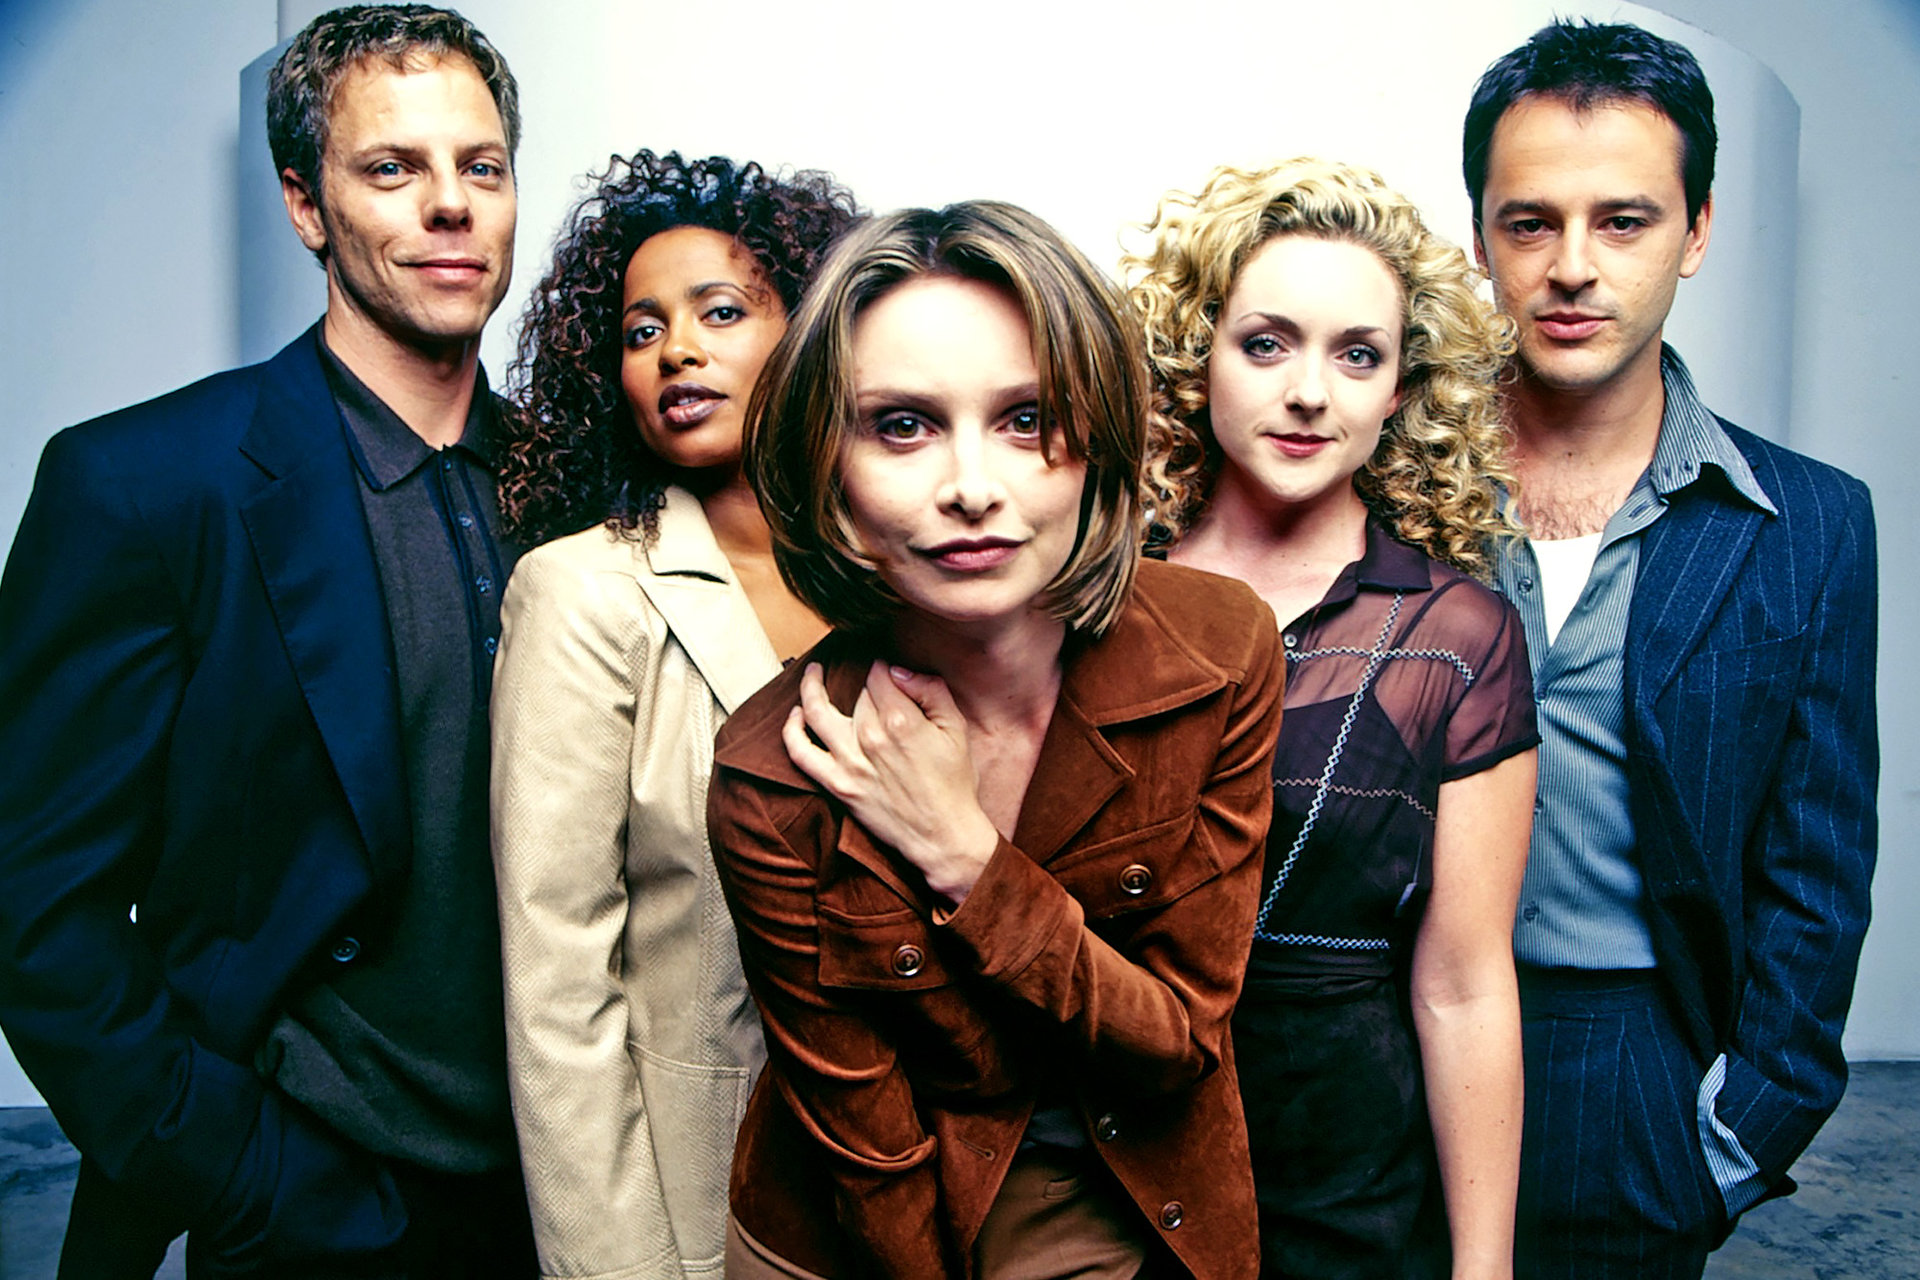 The cast of Ally McBeal, fronted by Calista Flockhart